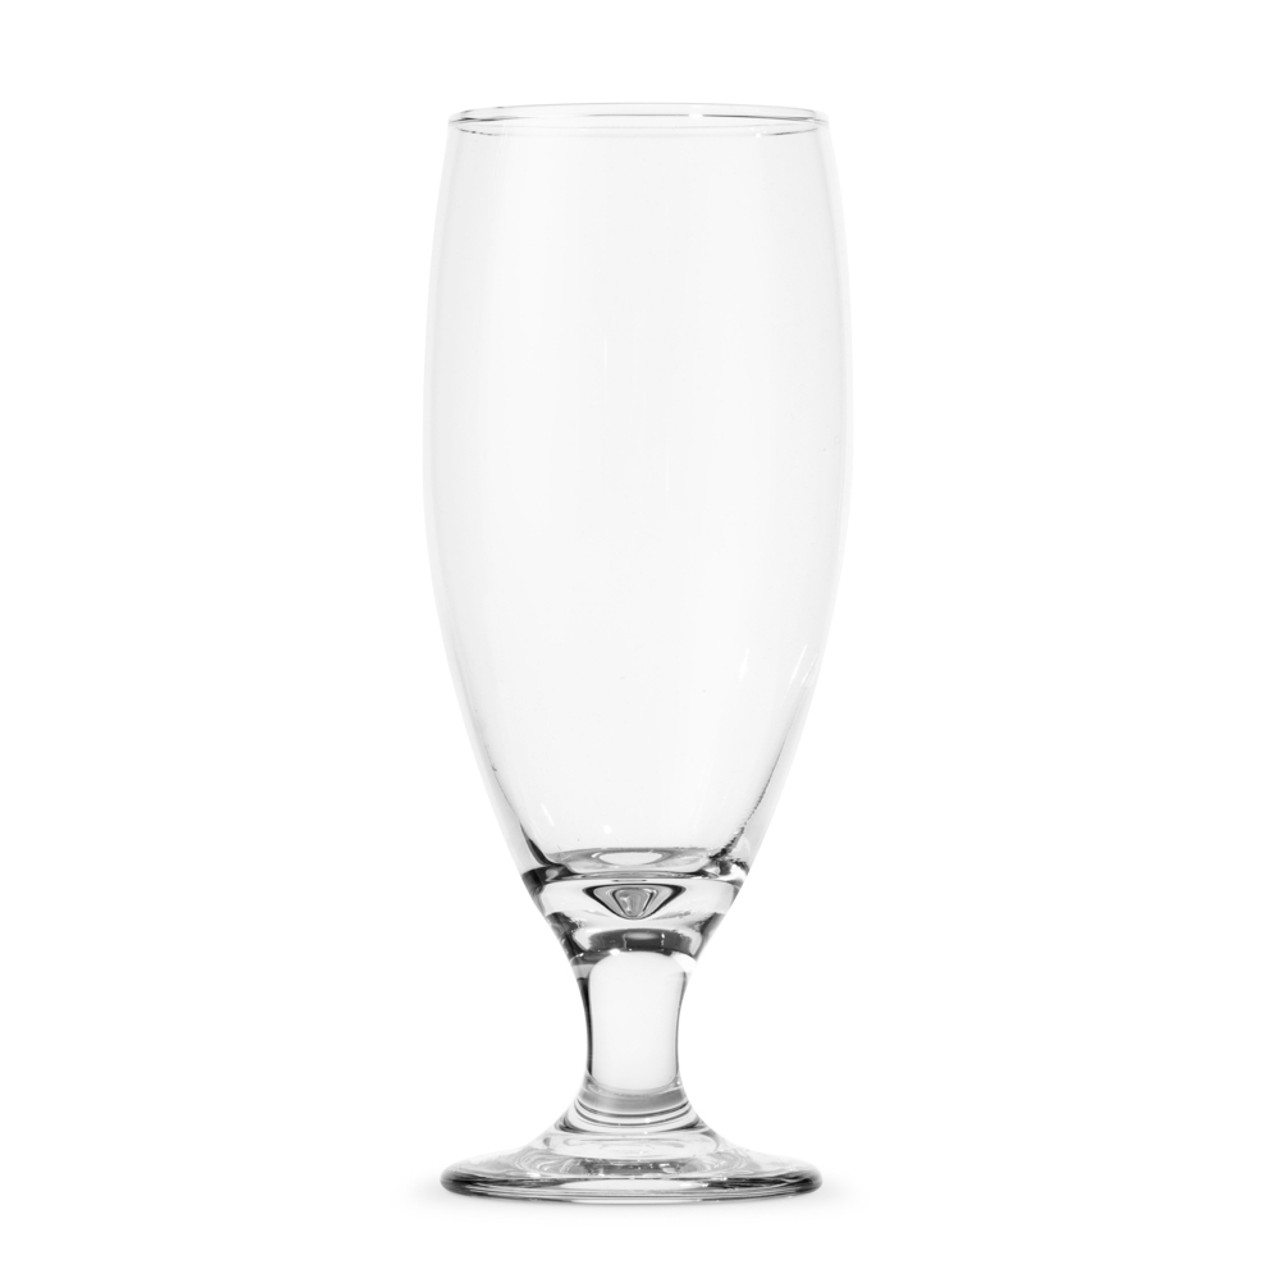 https://cdn11.bigcommerce.com/s-cznxq08r7/images/stencil/1280x1280/products/5487/14753/502249_Libbey_Embassy_Stemmed_Pilsner_Beer_Glass_-_16_oz_02__20496.1665773744.jpg?c=1